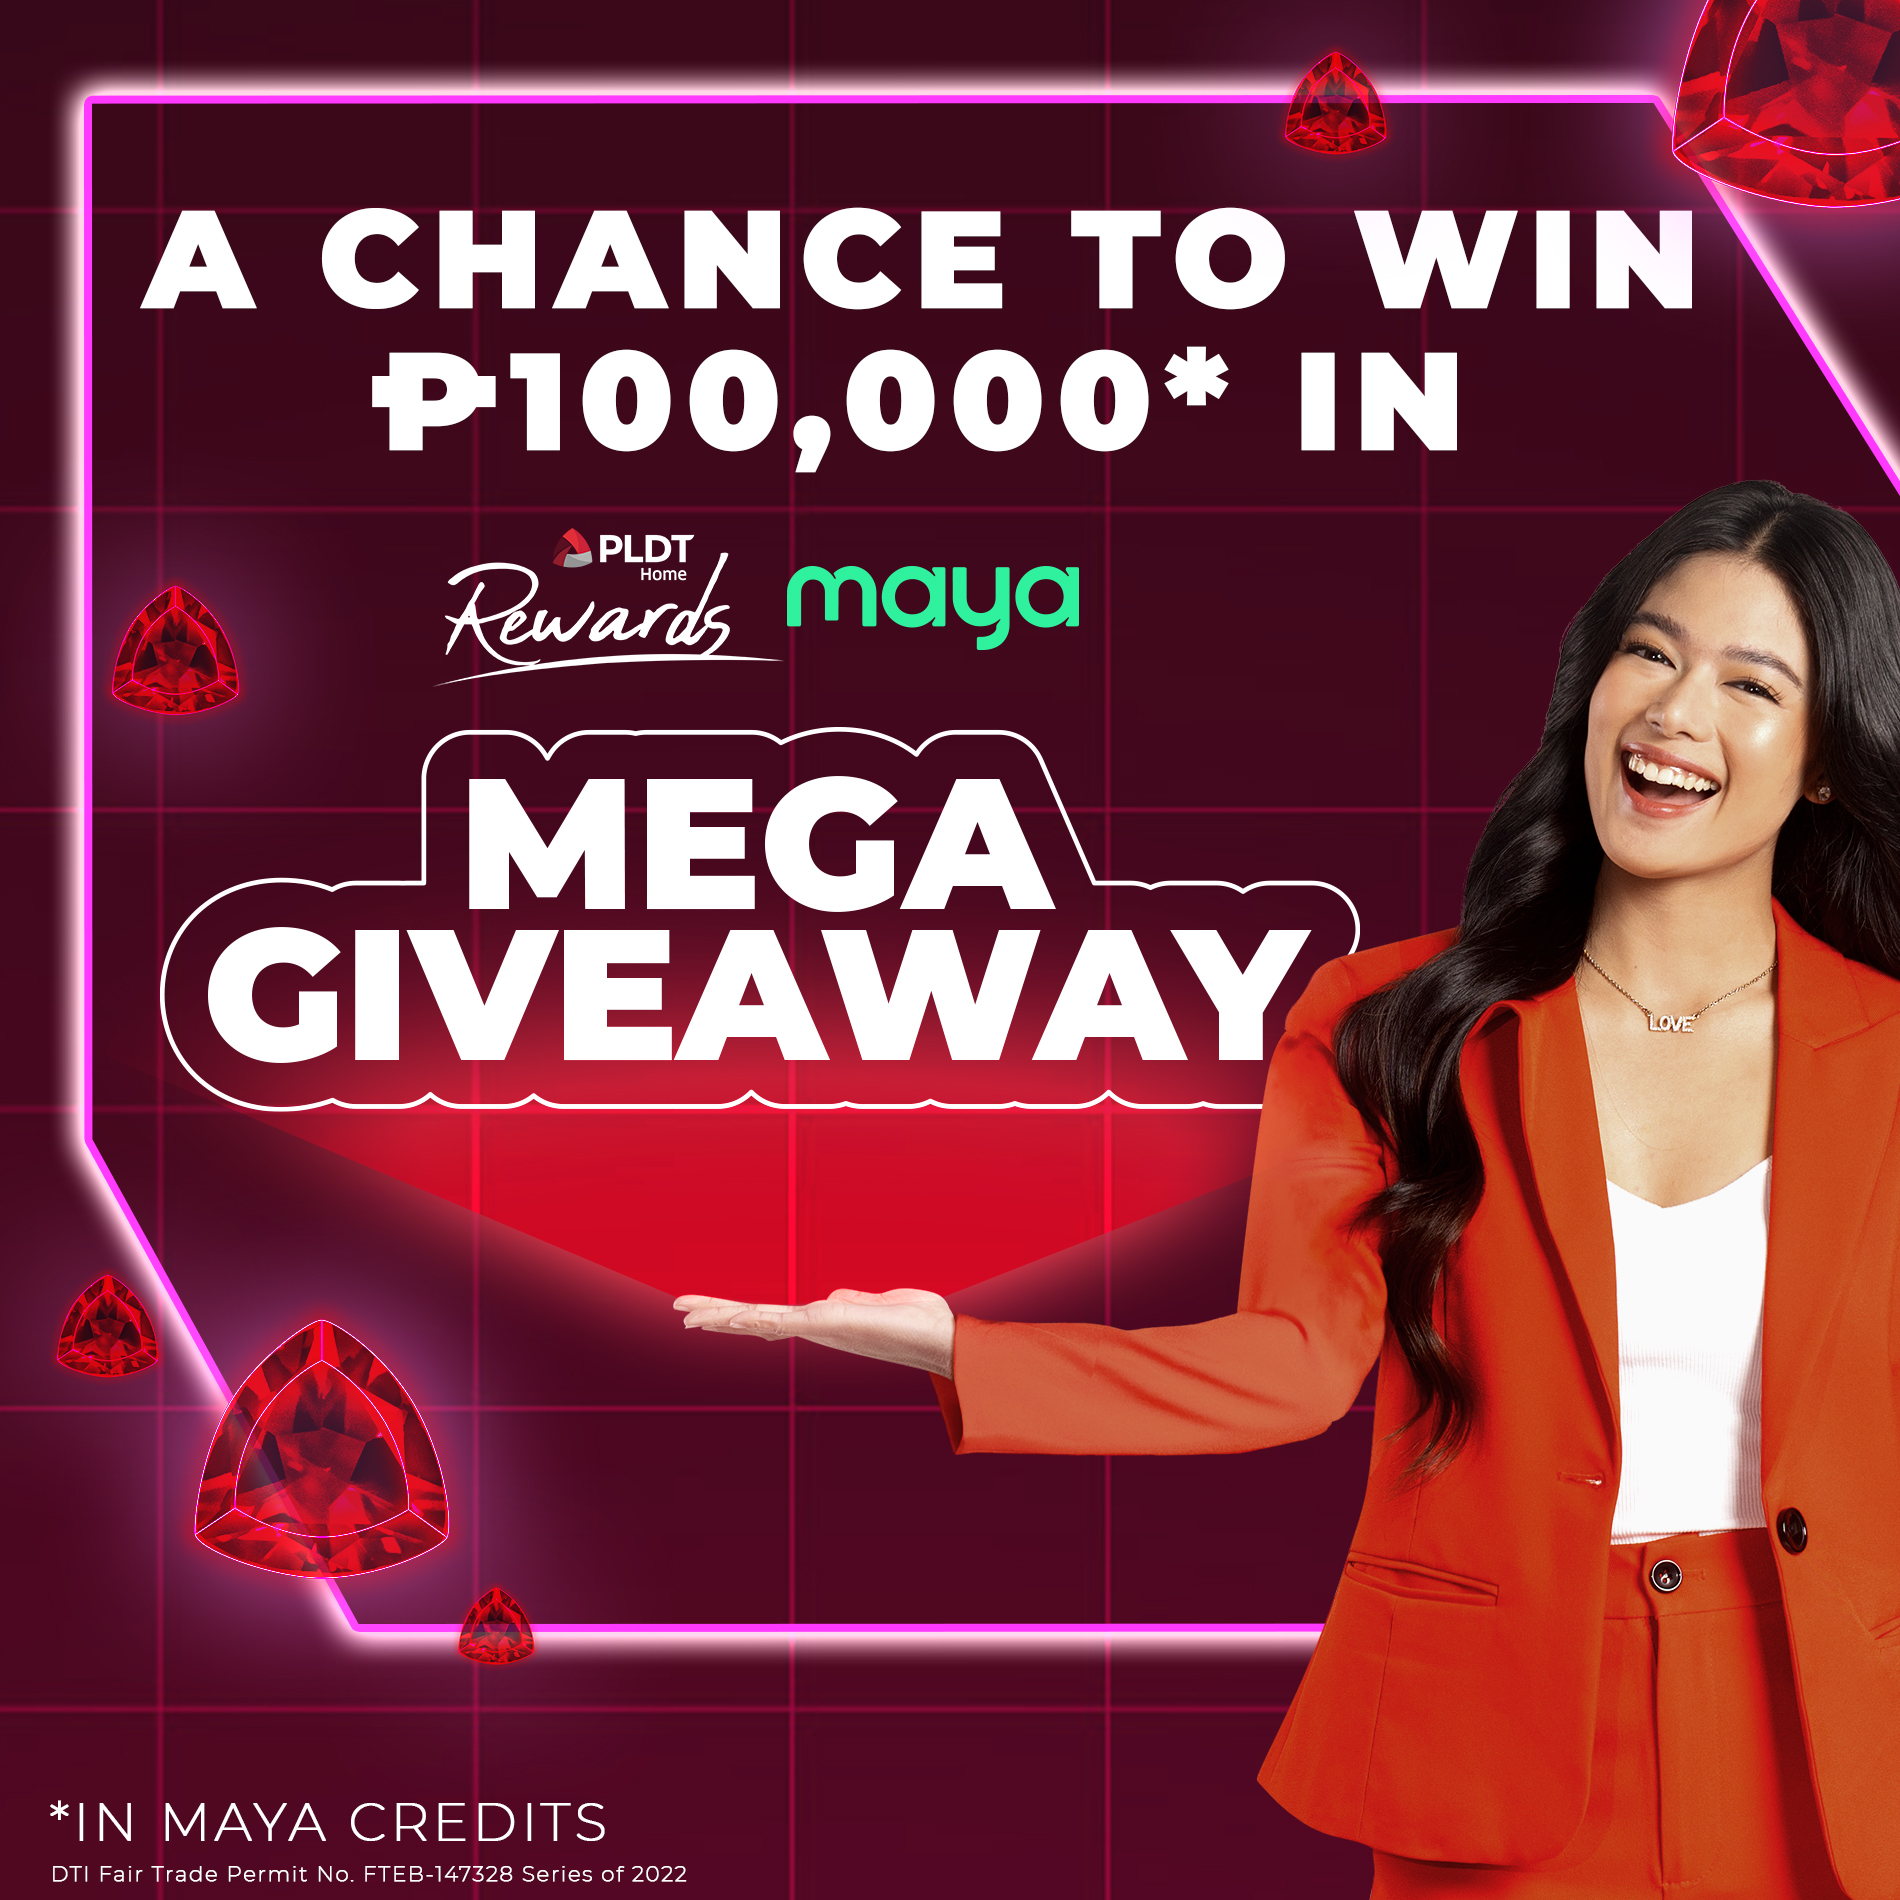 boost-your-home-budget-with-p100k-from-the-pldt-home-rewards-x-maya-giveaway-mommy-iris-top